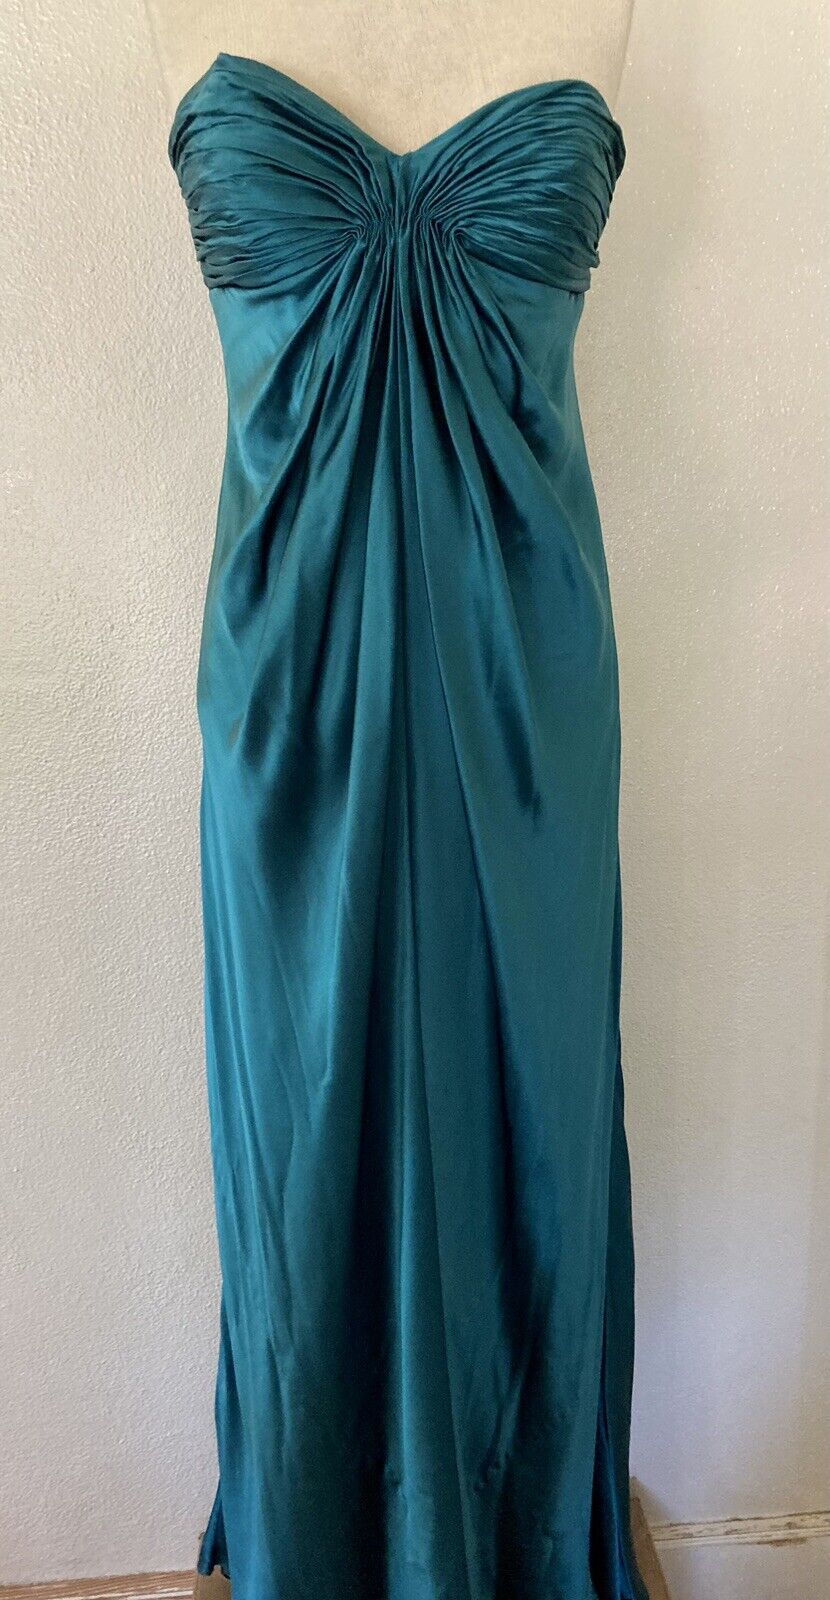 LAUNDRY by Design Gorgeous Teal Strapless Evening… - image 2